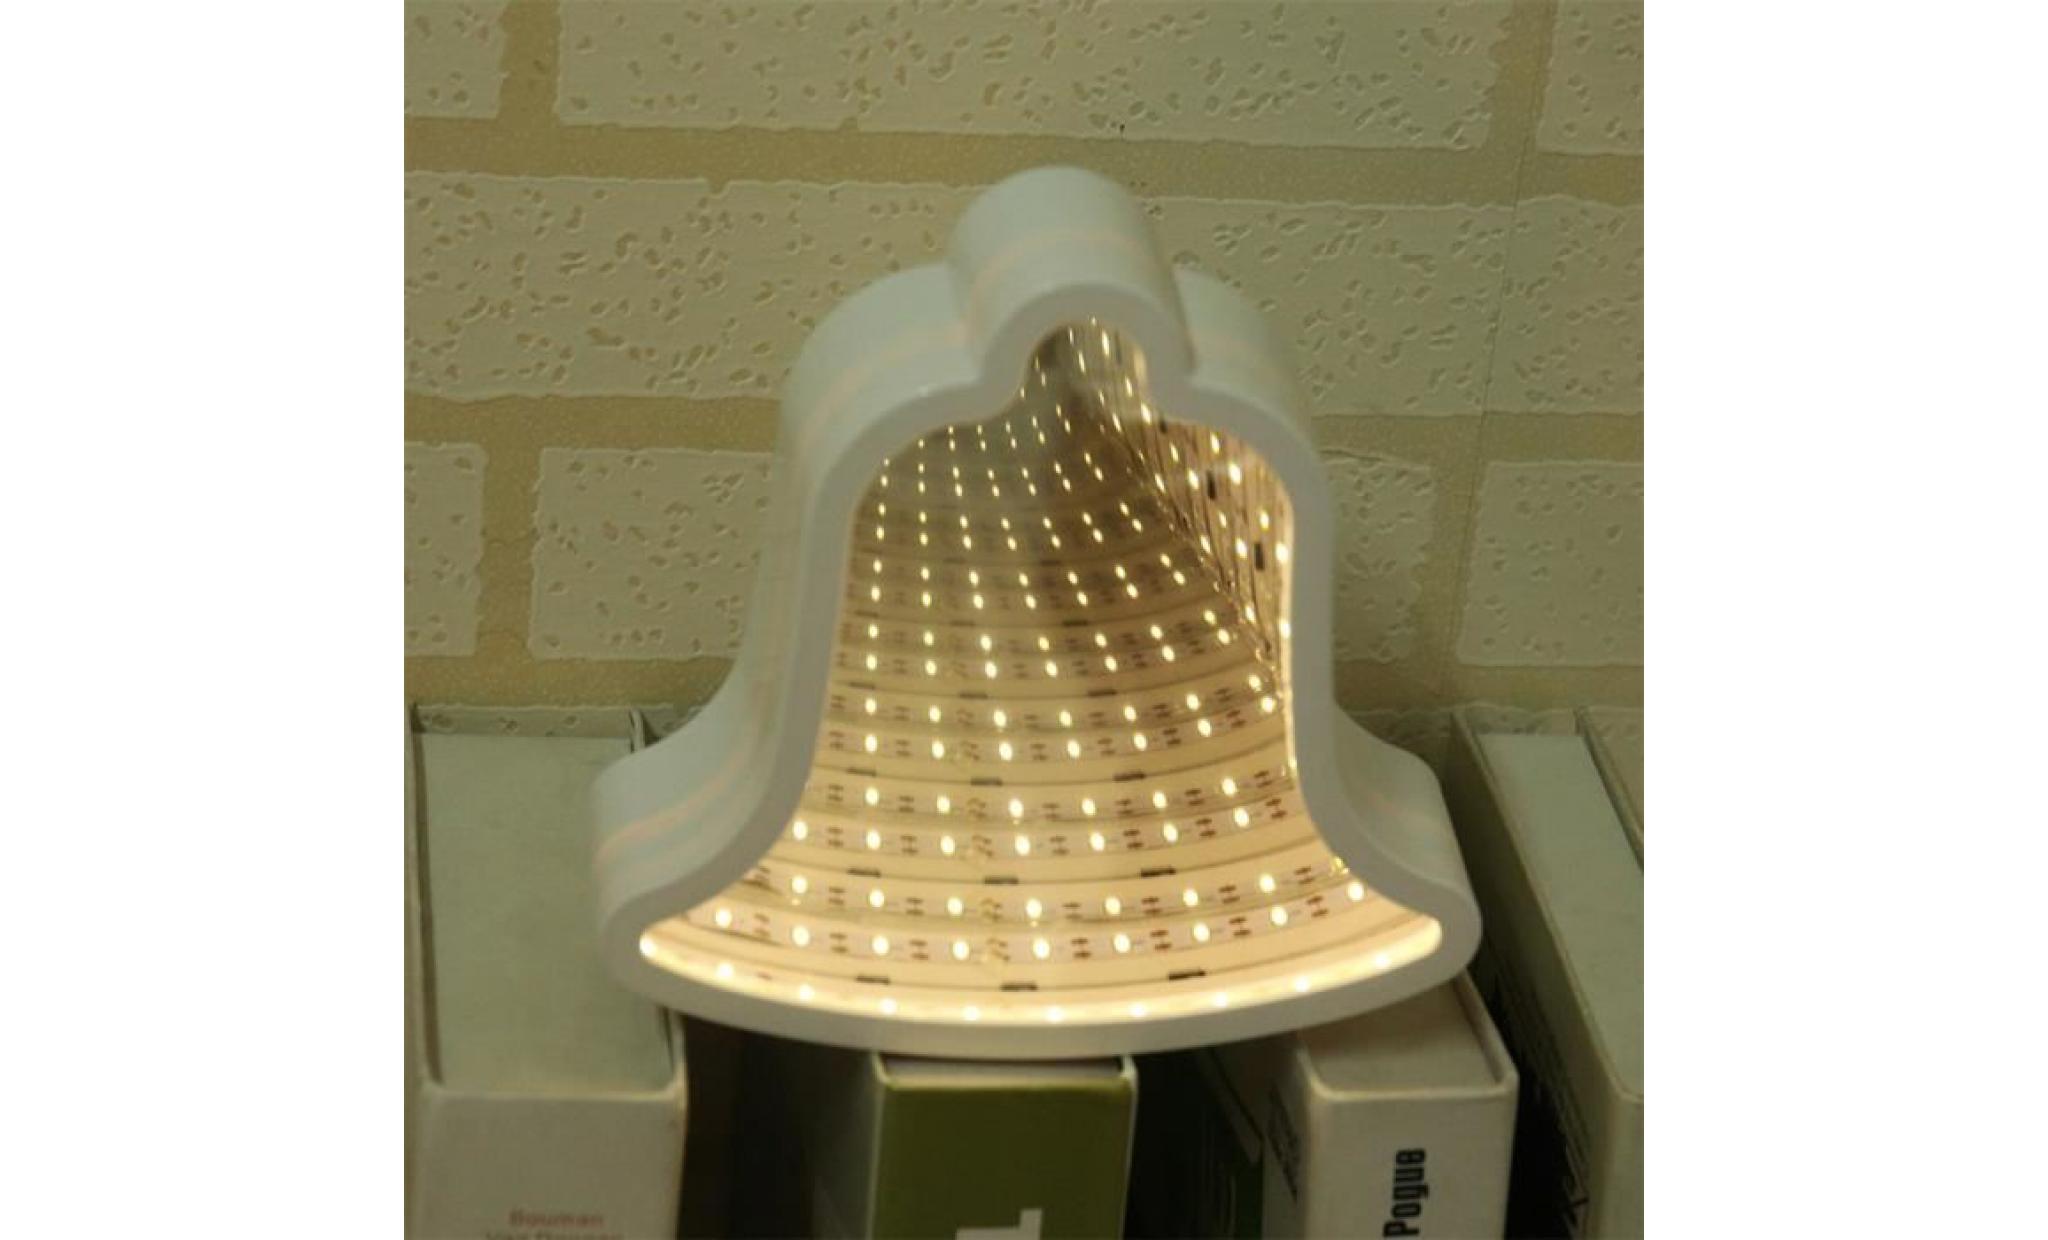 marquee led night light chambre tunnel modeling home décor batterie lampe mur_cxq676 pas cher